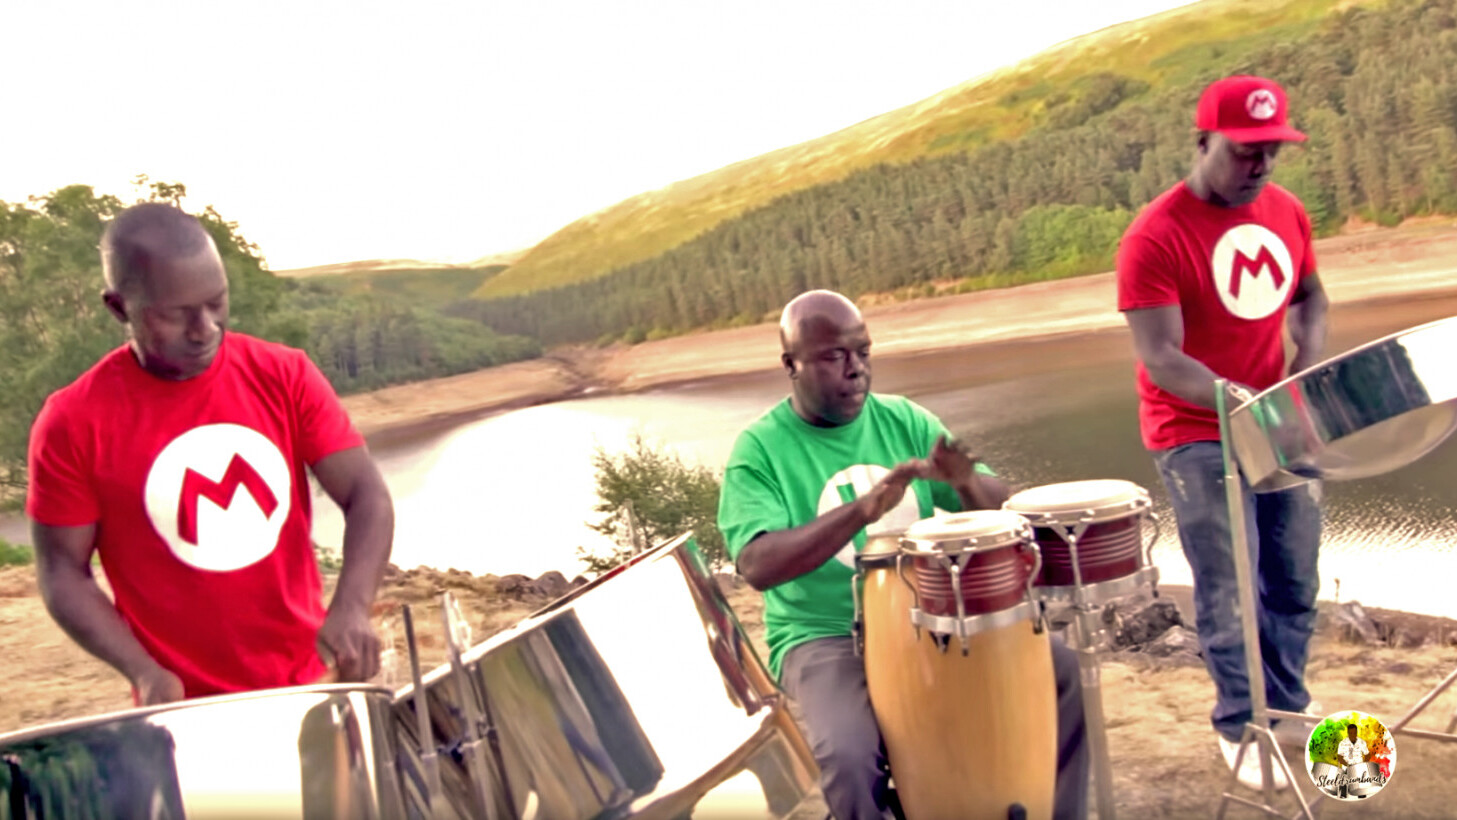 Video game theme music played on steel drums is our newest obsession